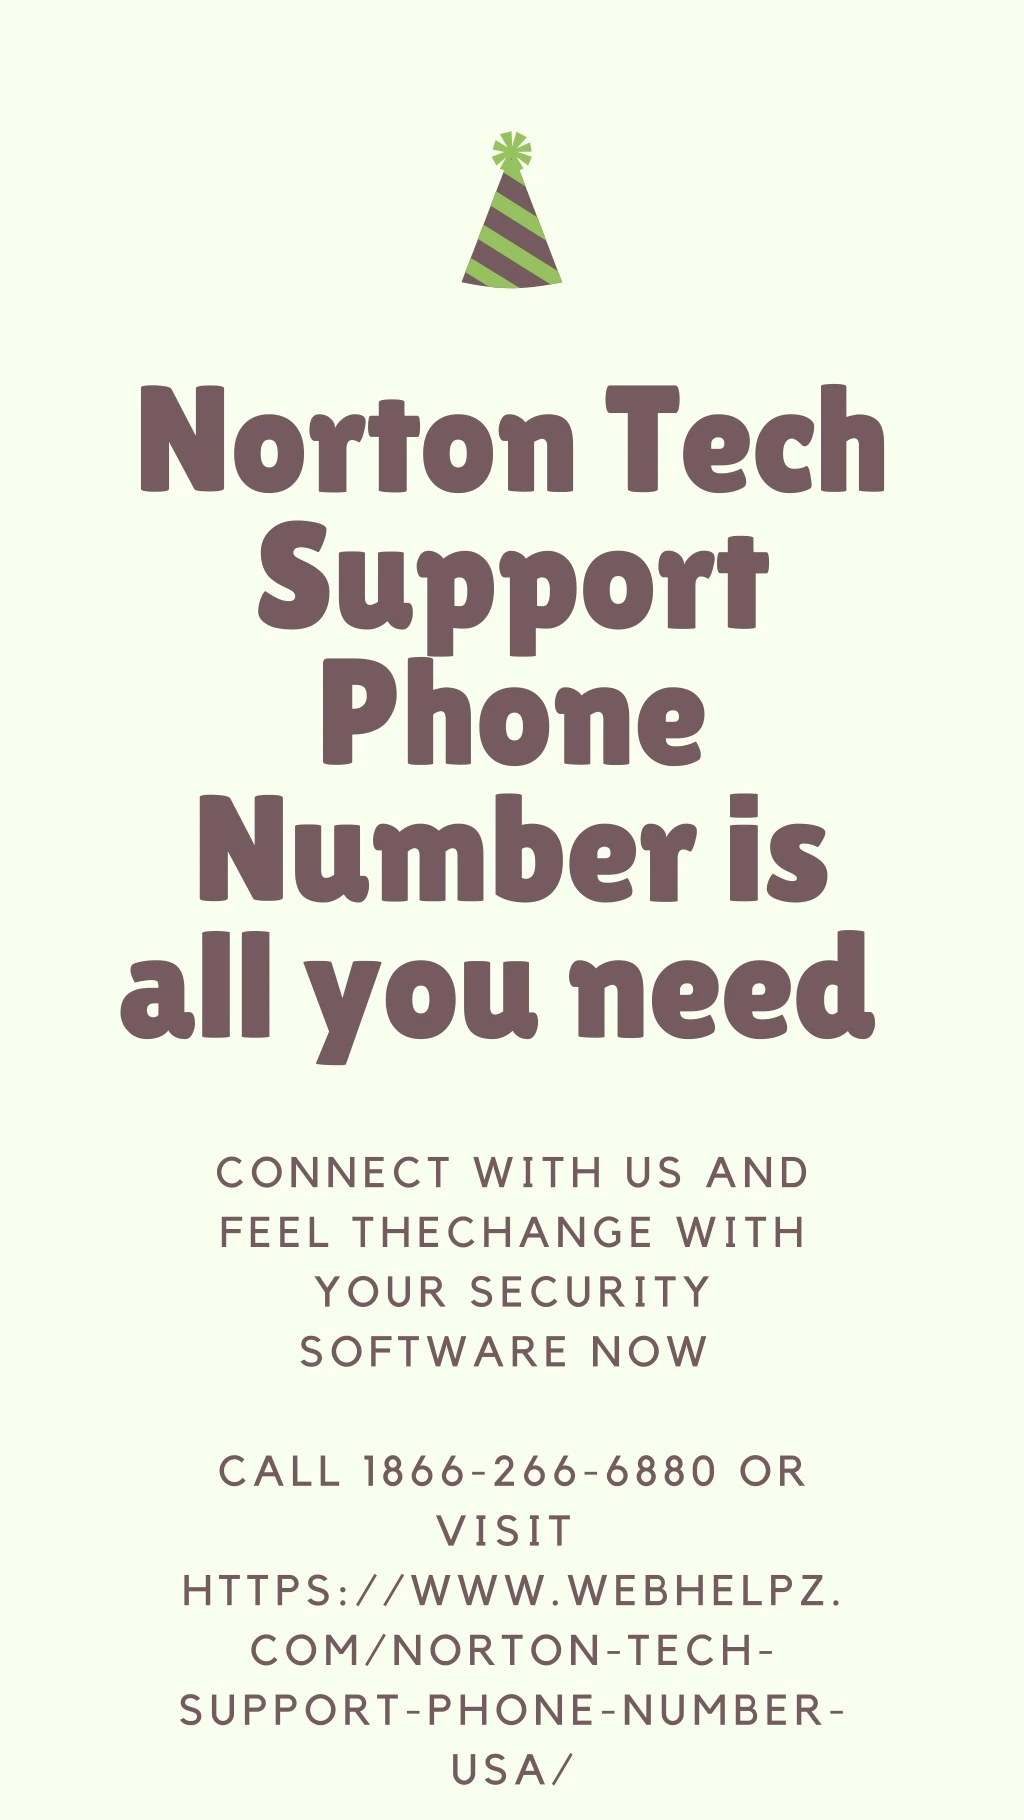 norton tech support phone number is all you need